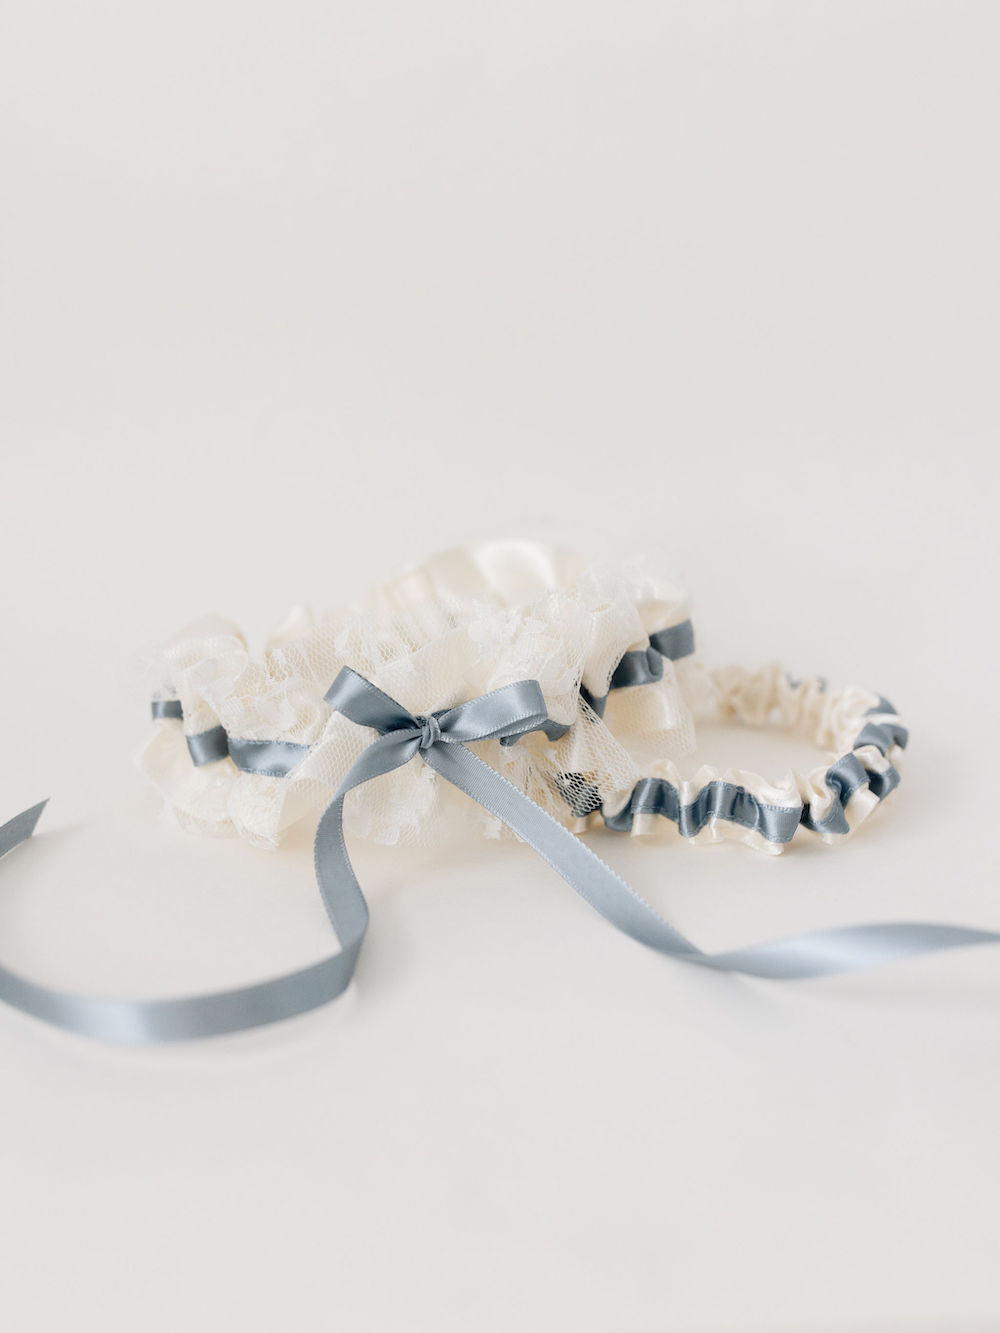 cream wedding garter set with dusty blue ribbon and embroidery handmade by wedding expert The Garter Girl